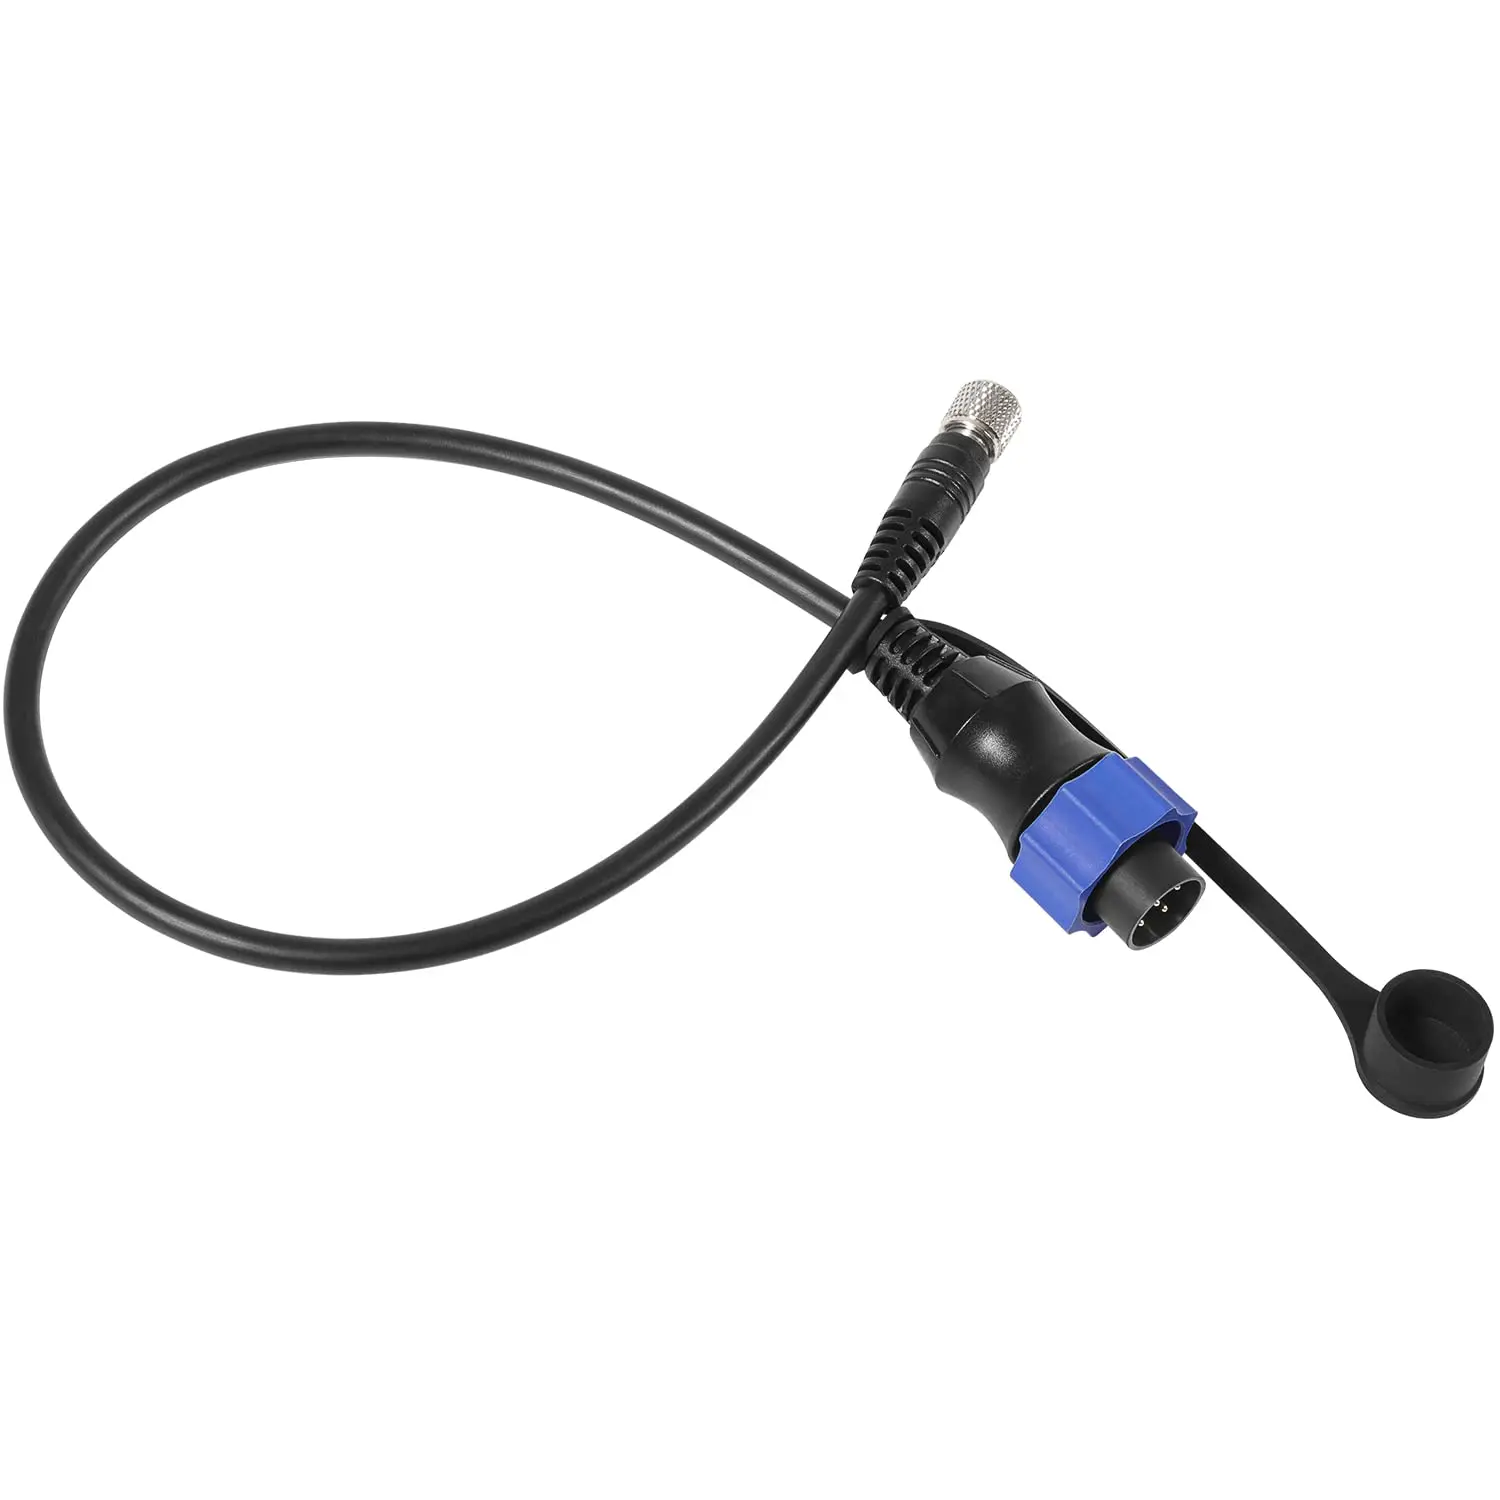 Mkr-us2-10 Universal Sonar 2 Adaptor Cable Fit For Lowrance Fish Finder  Works On Us2 Sonar Transducer , Minn Kota Trolling Motor - Boat Parts &  Accessories - AliExpress